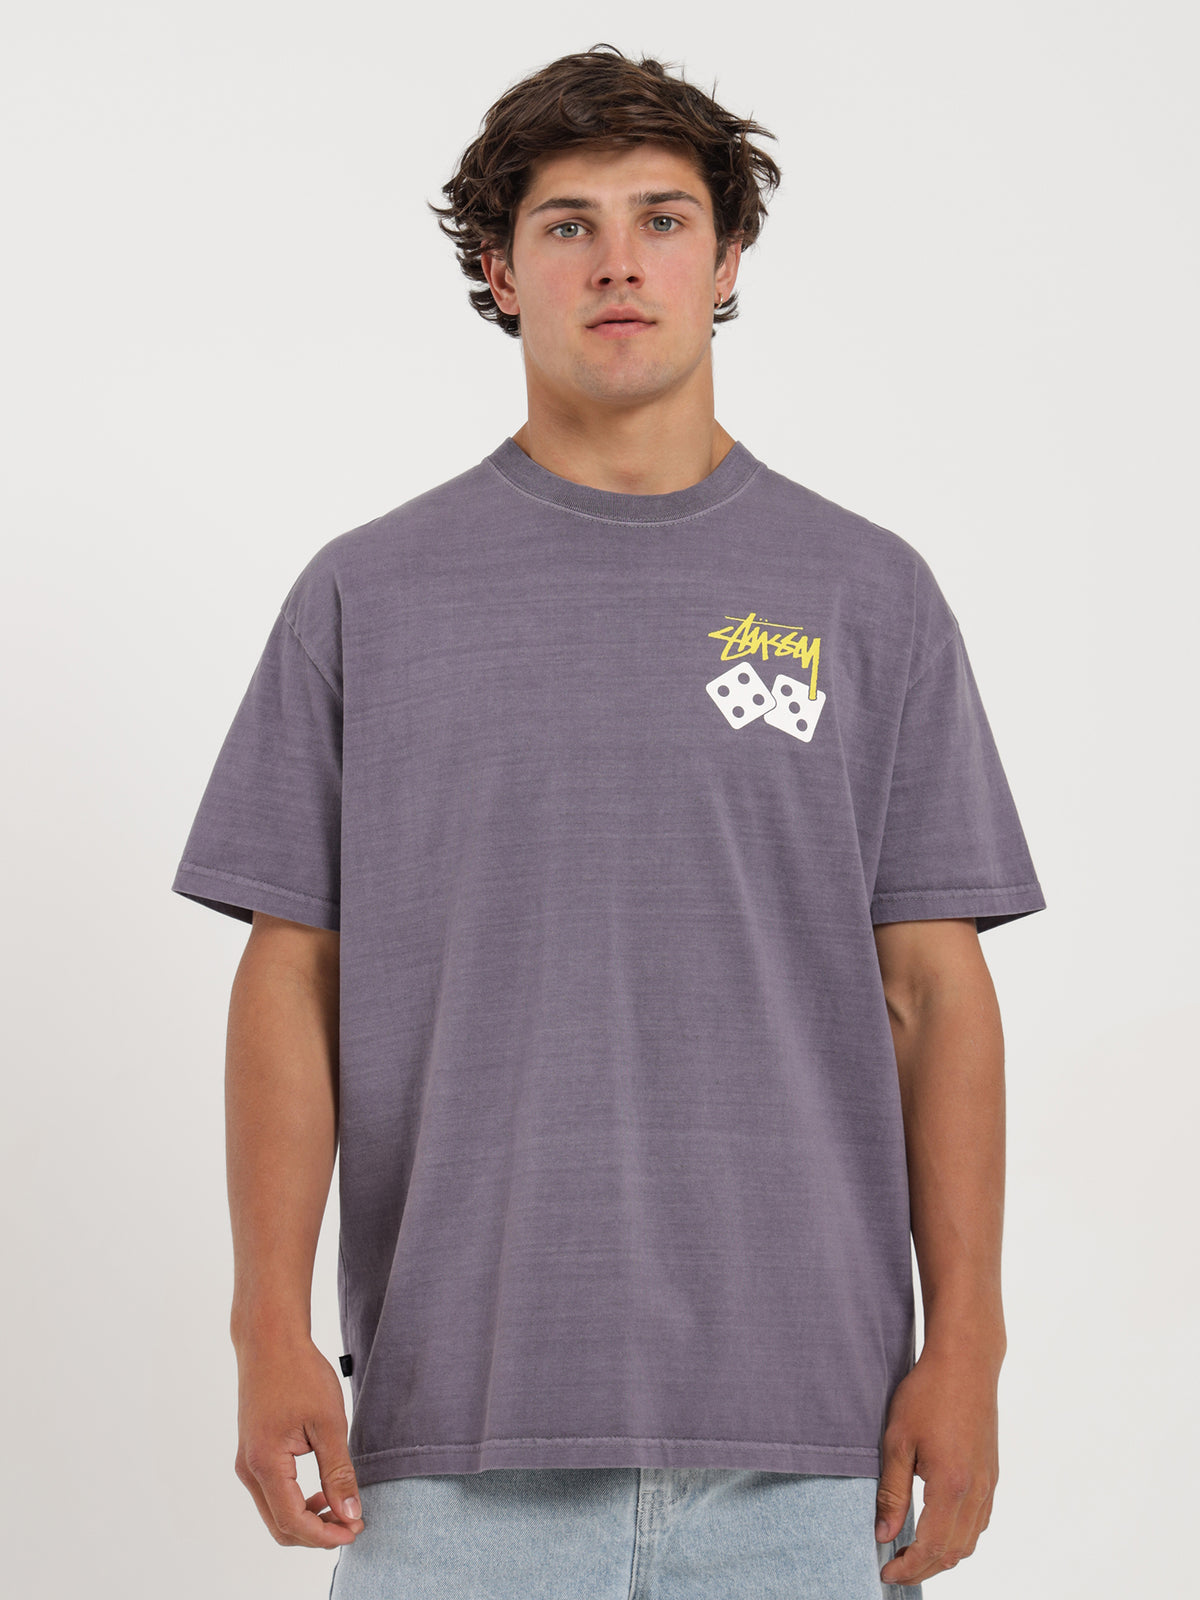 Colour Dice Heavyweight T-Shirt in Pigment Purple